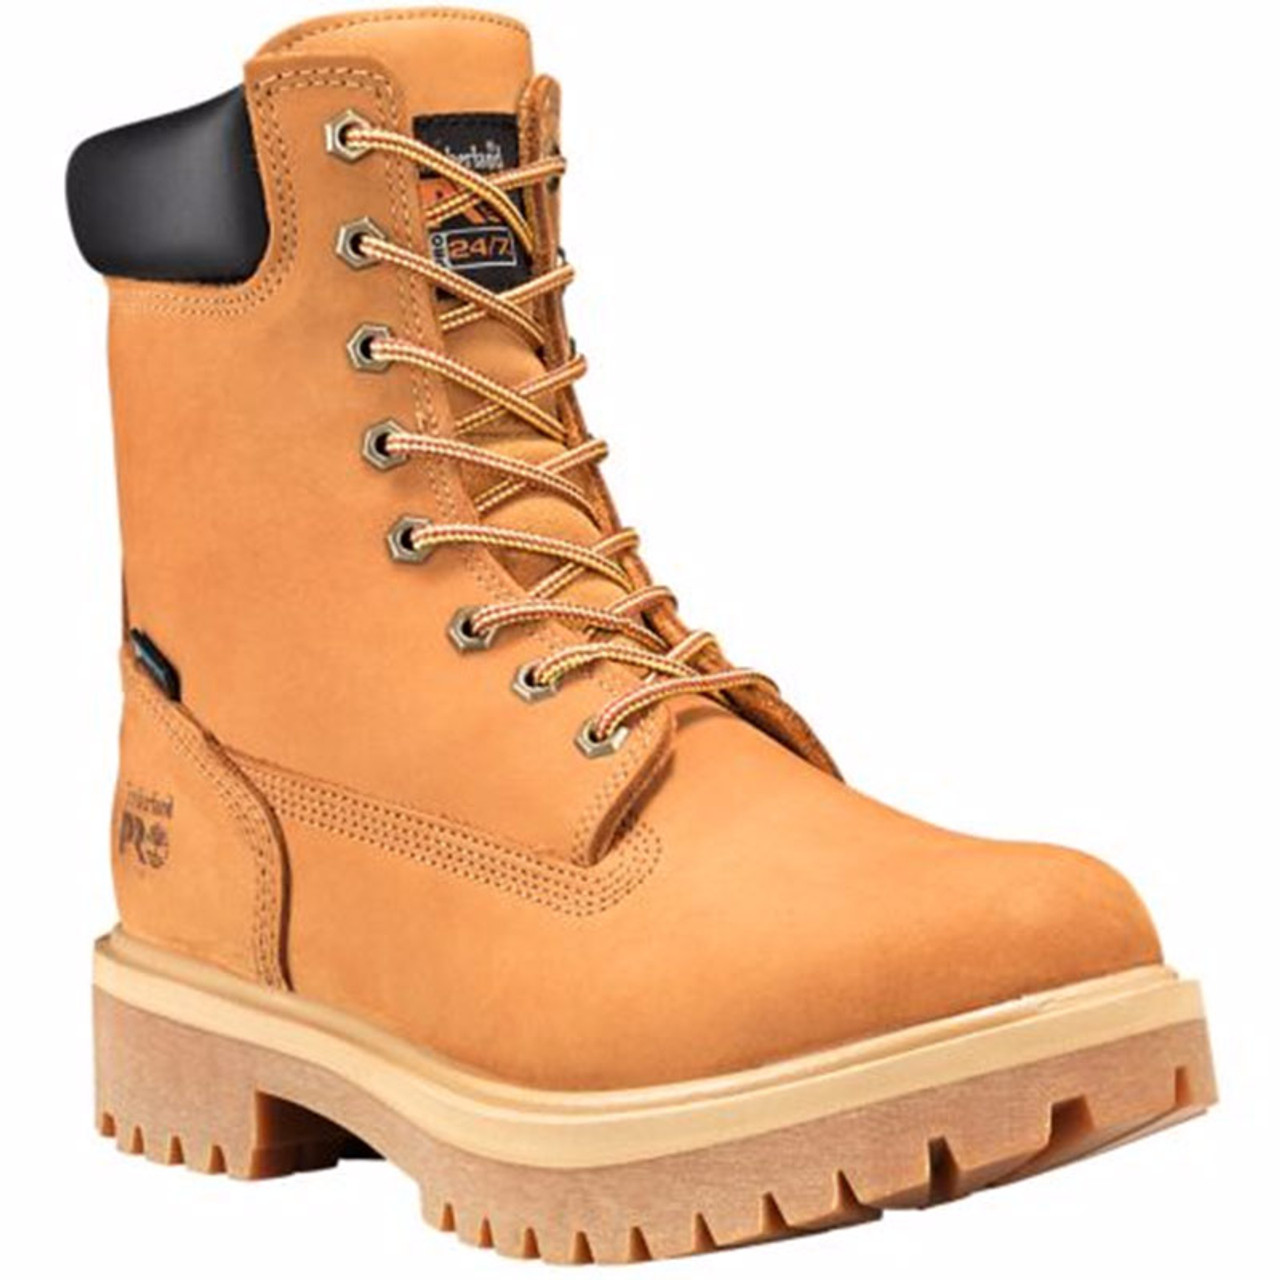 Kameraad doel venster Timberland PRO 26002 DIRECT ATTACH Steel Toe 400g Insulated Work Boots -  Family Footwear Center